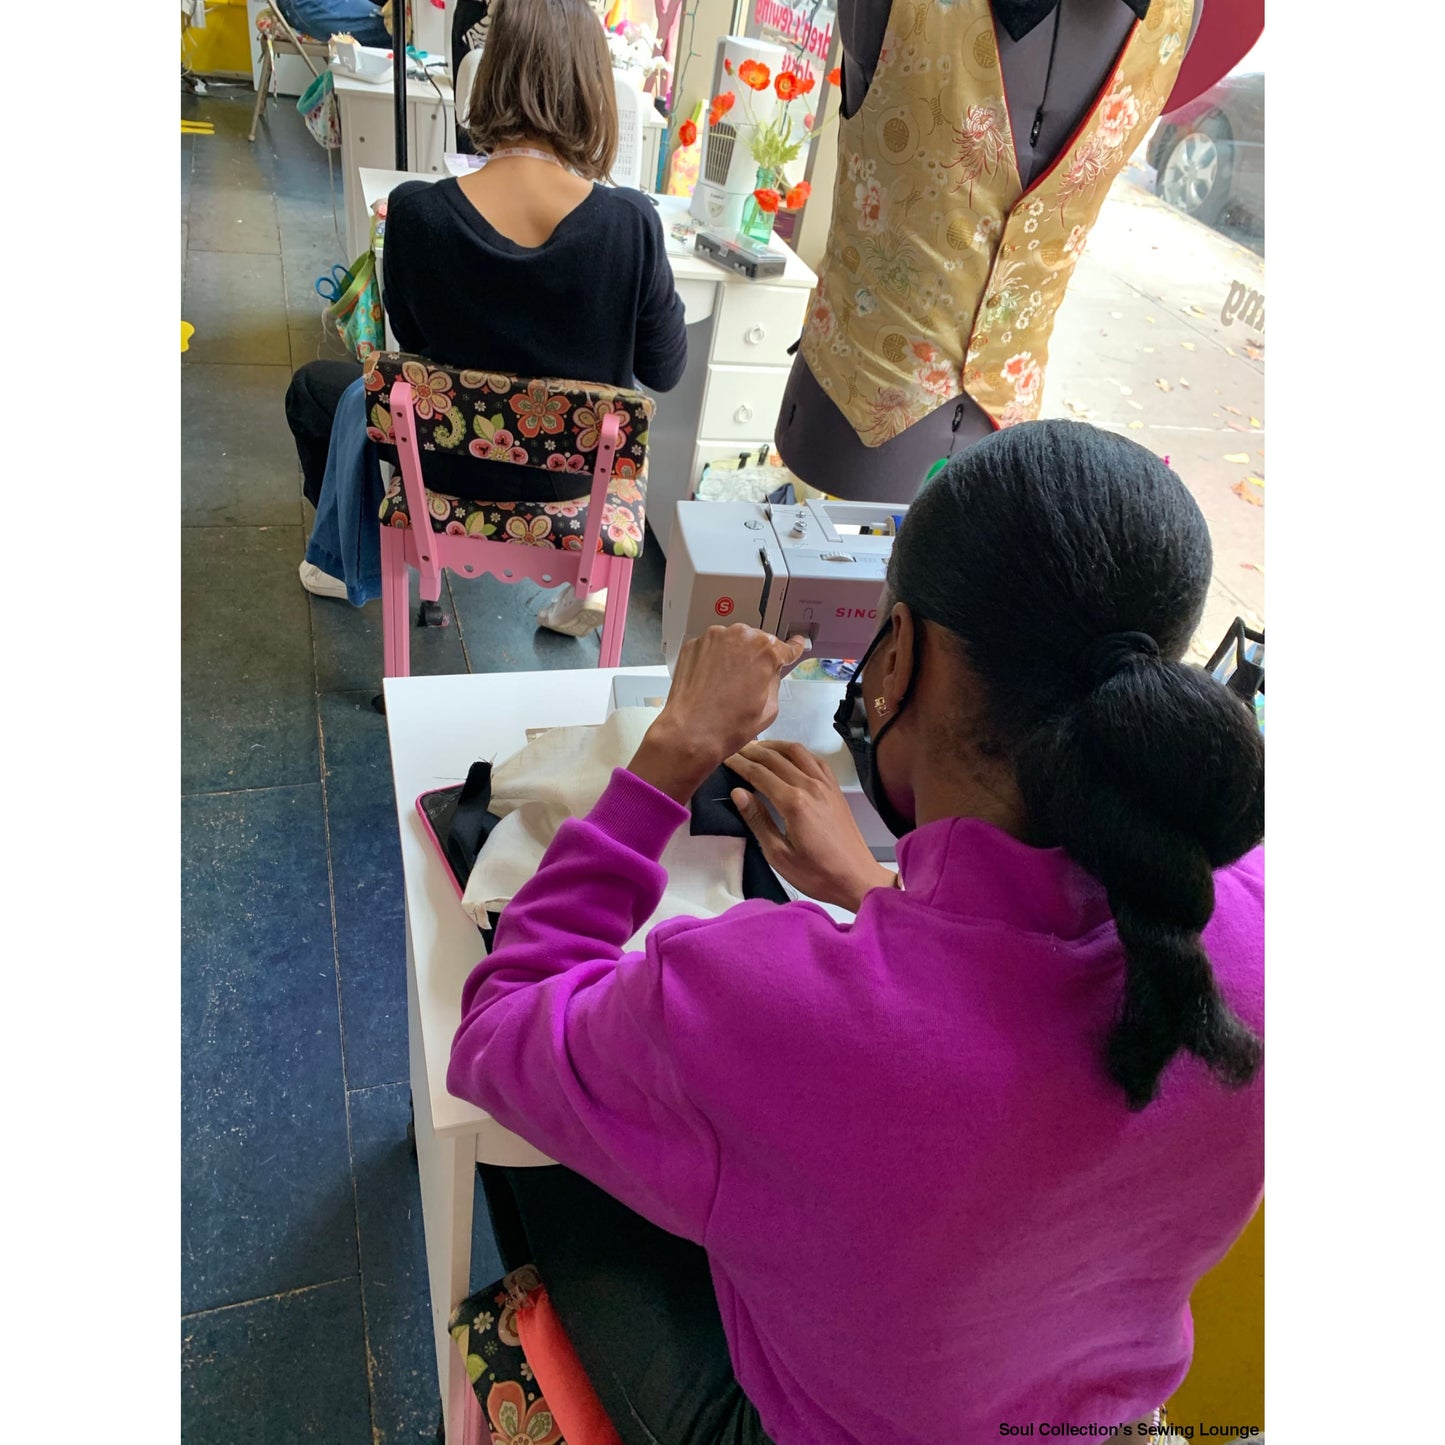 Beginners Sewing Classes In Shop - Sewing Classes